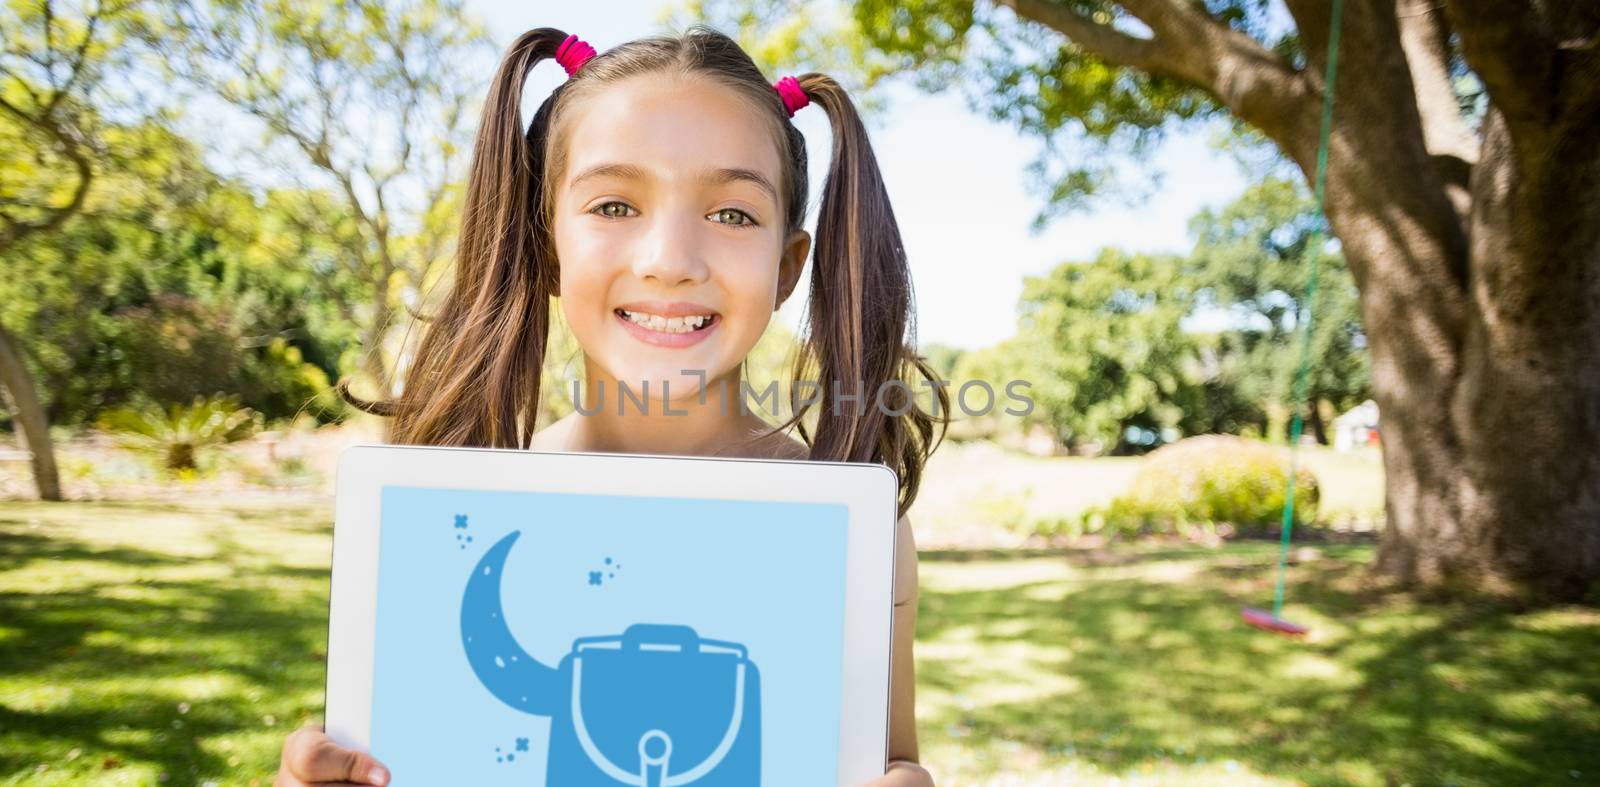 Print against portrait of young girl holding digital tablet